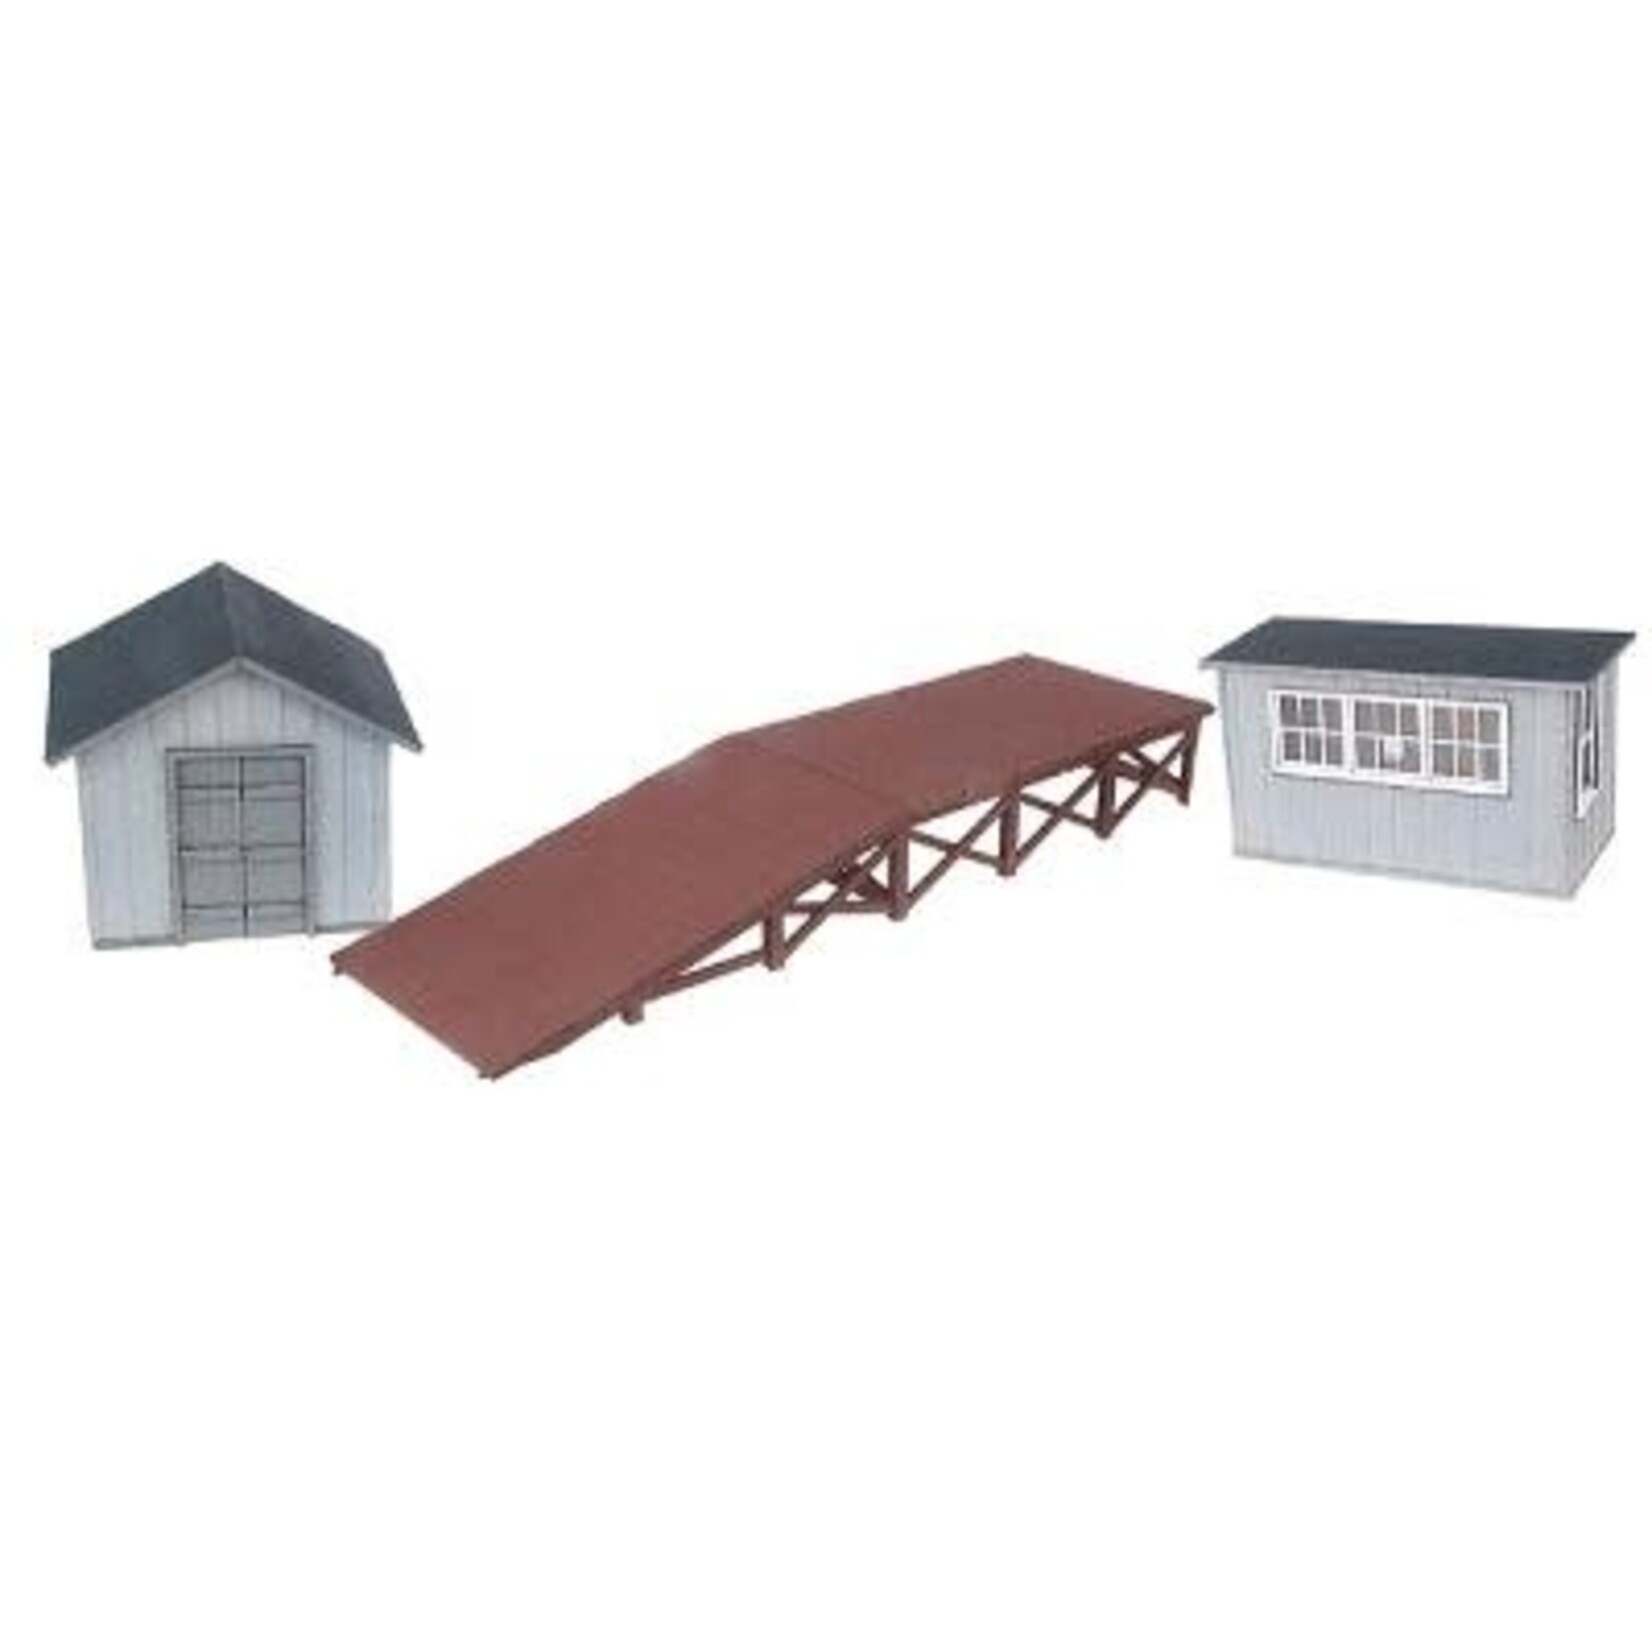 Scale University 1008K O Laser Cut Three Track-Side Structures Kit